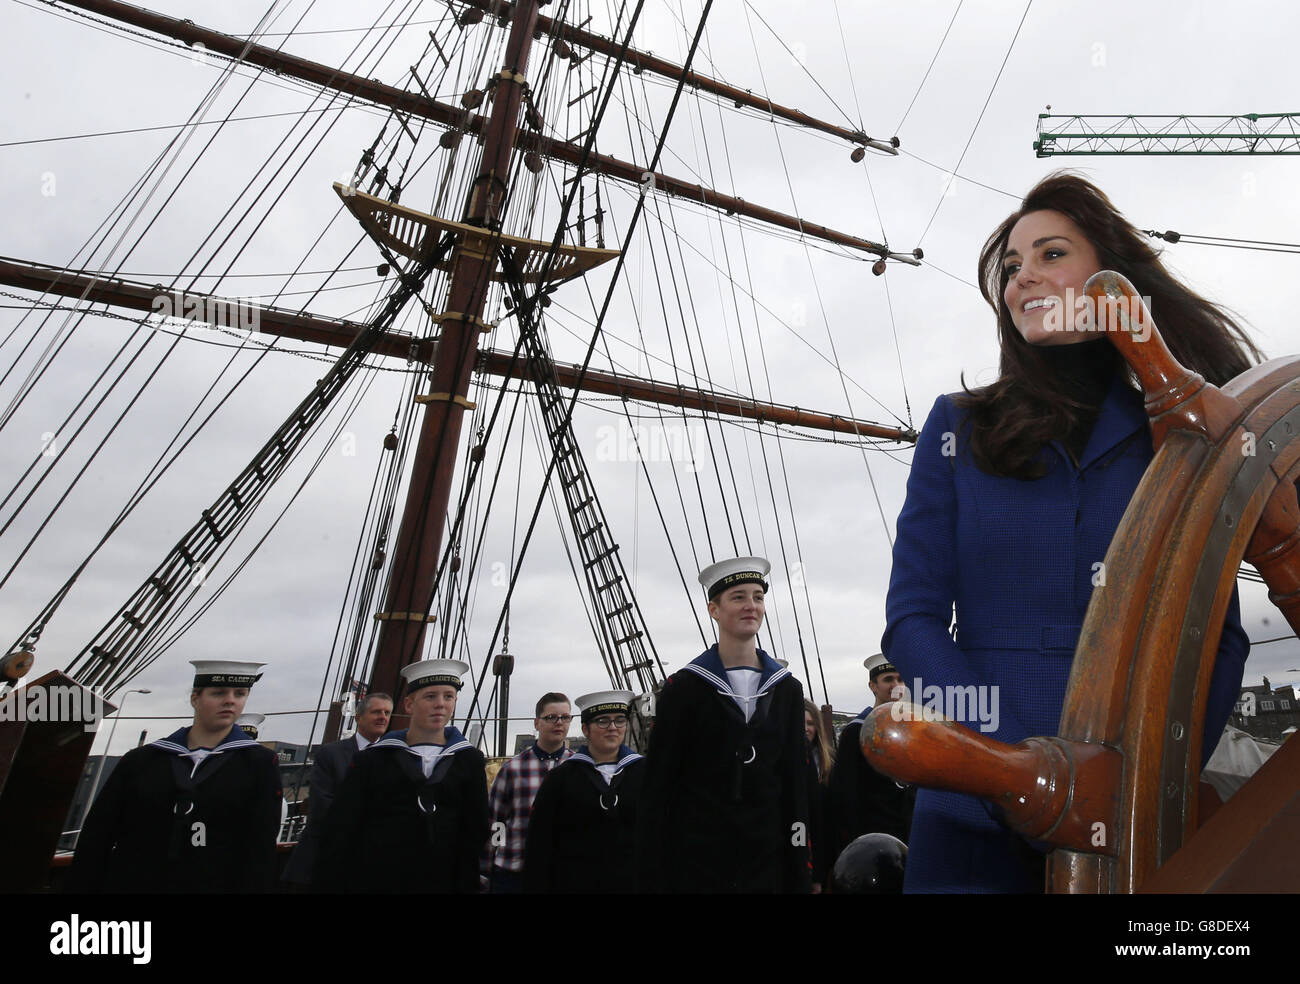 The Duchess of Cambridge, who is also known as the Countess of Strathearn in Scotland during her visit to the original Royal Research Ship Discovery as part of her and husband, the Duke of Cambridge, visit to Dundee in Scotland. Stock Photo